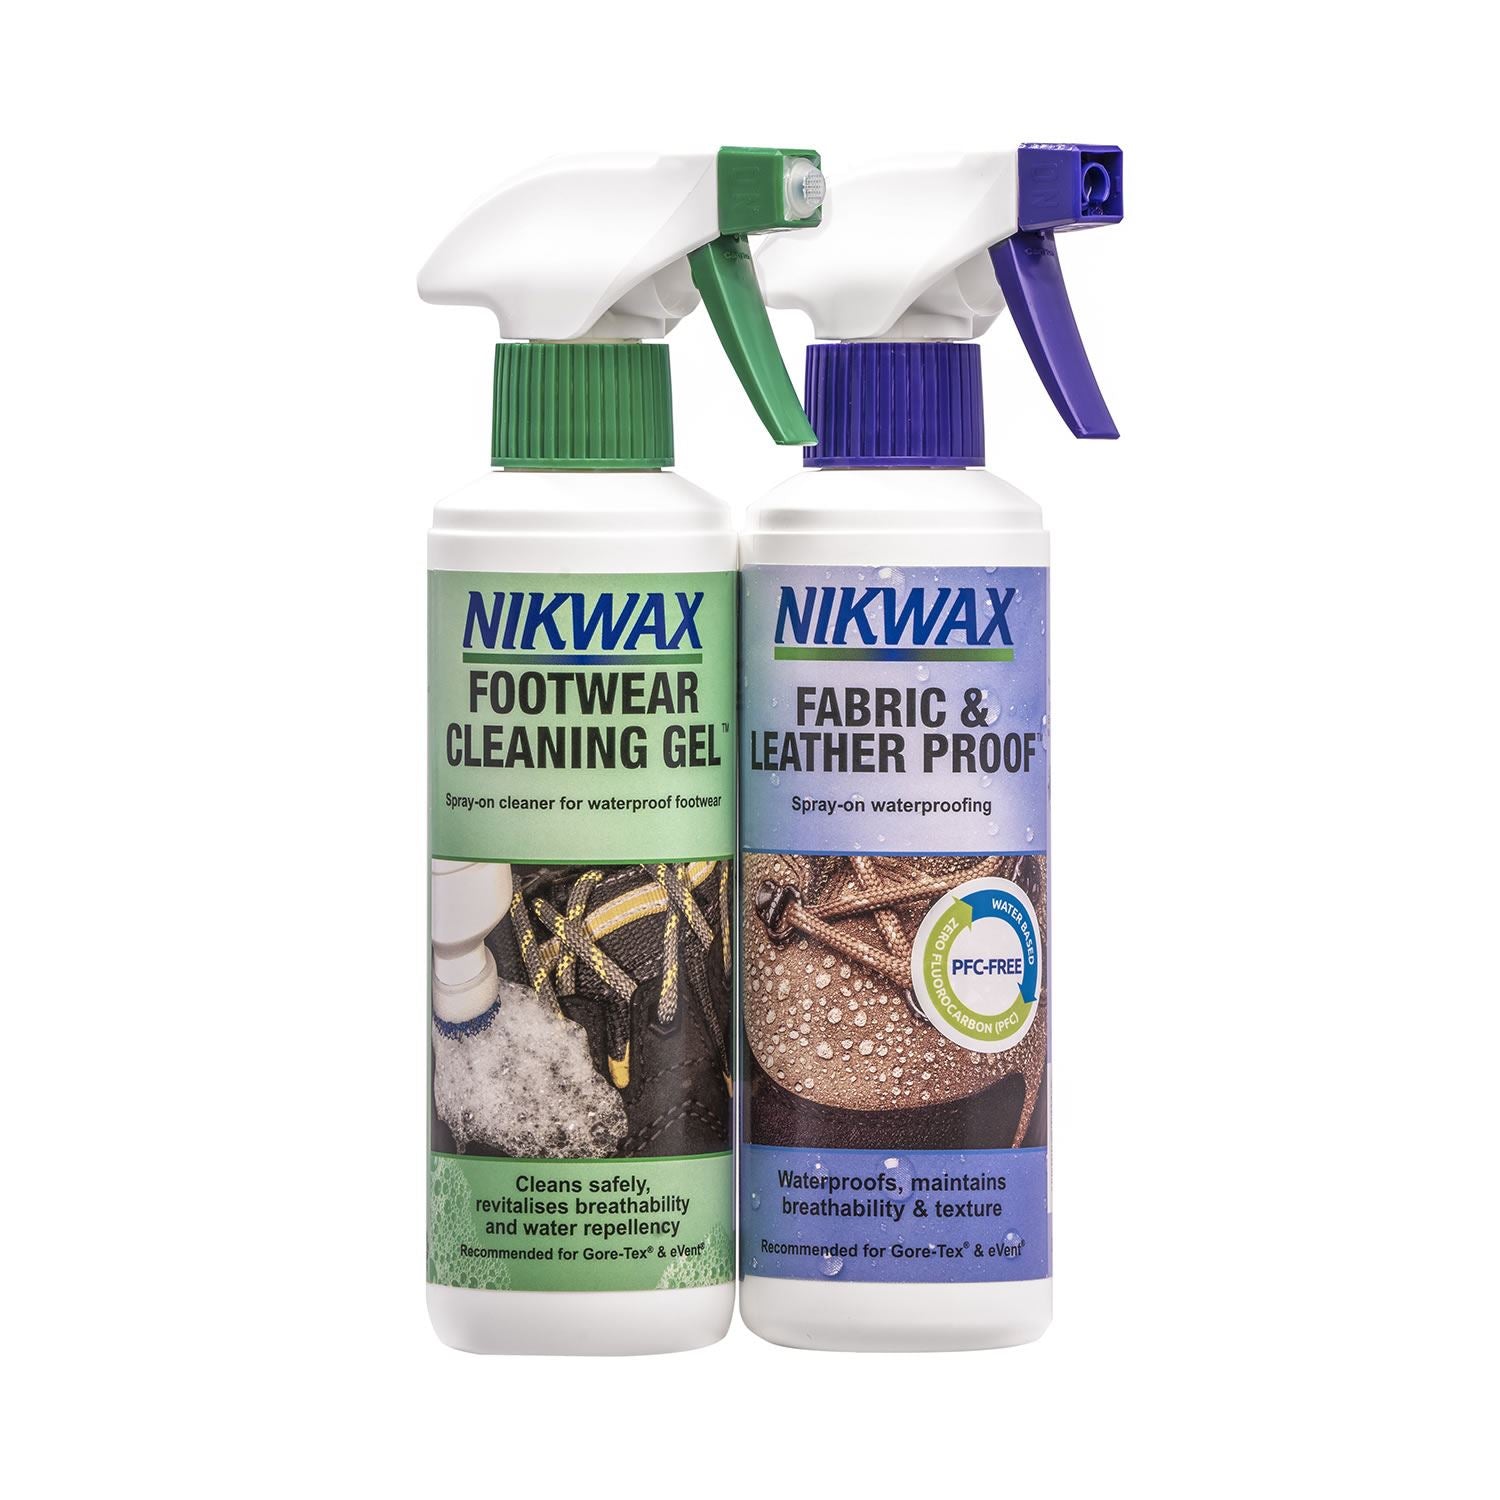 Nikwax Footwear Cleaning Gel/Fabric & Leather Proof Spray - Just Horse Riders